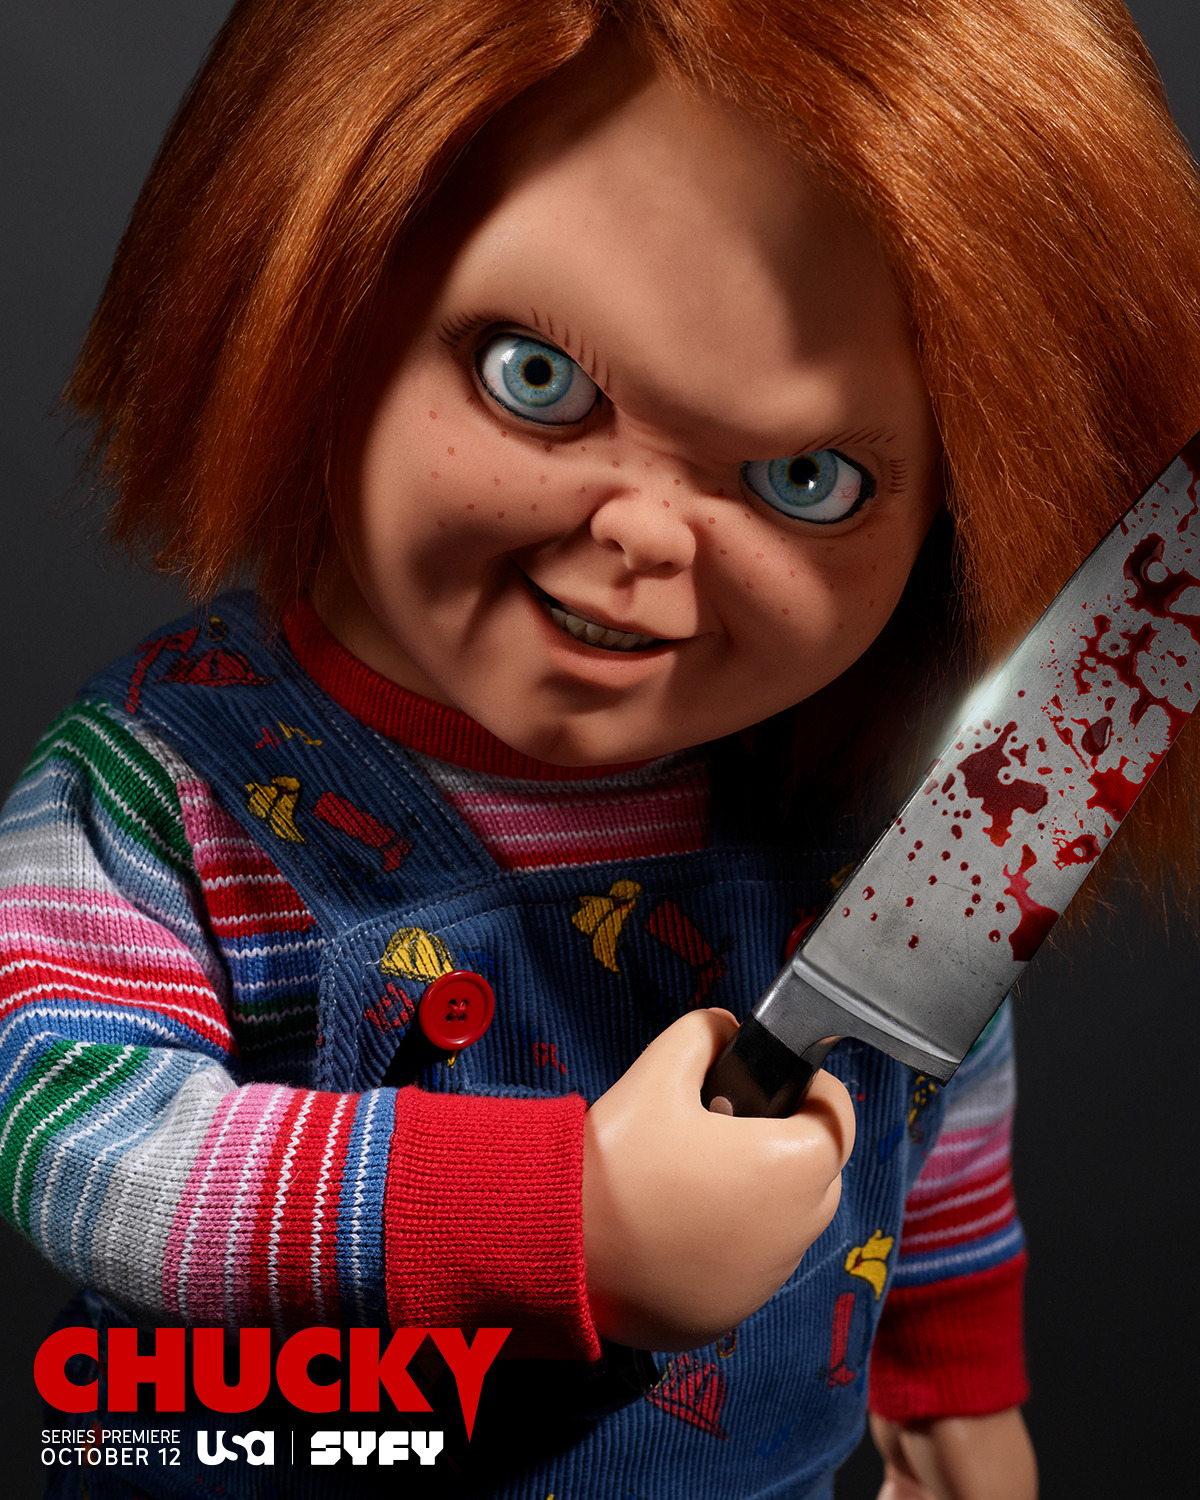 Extra Large TV Poster Image for Chucky (#1 of 8)